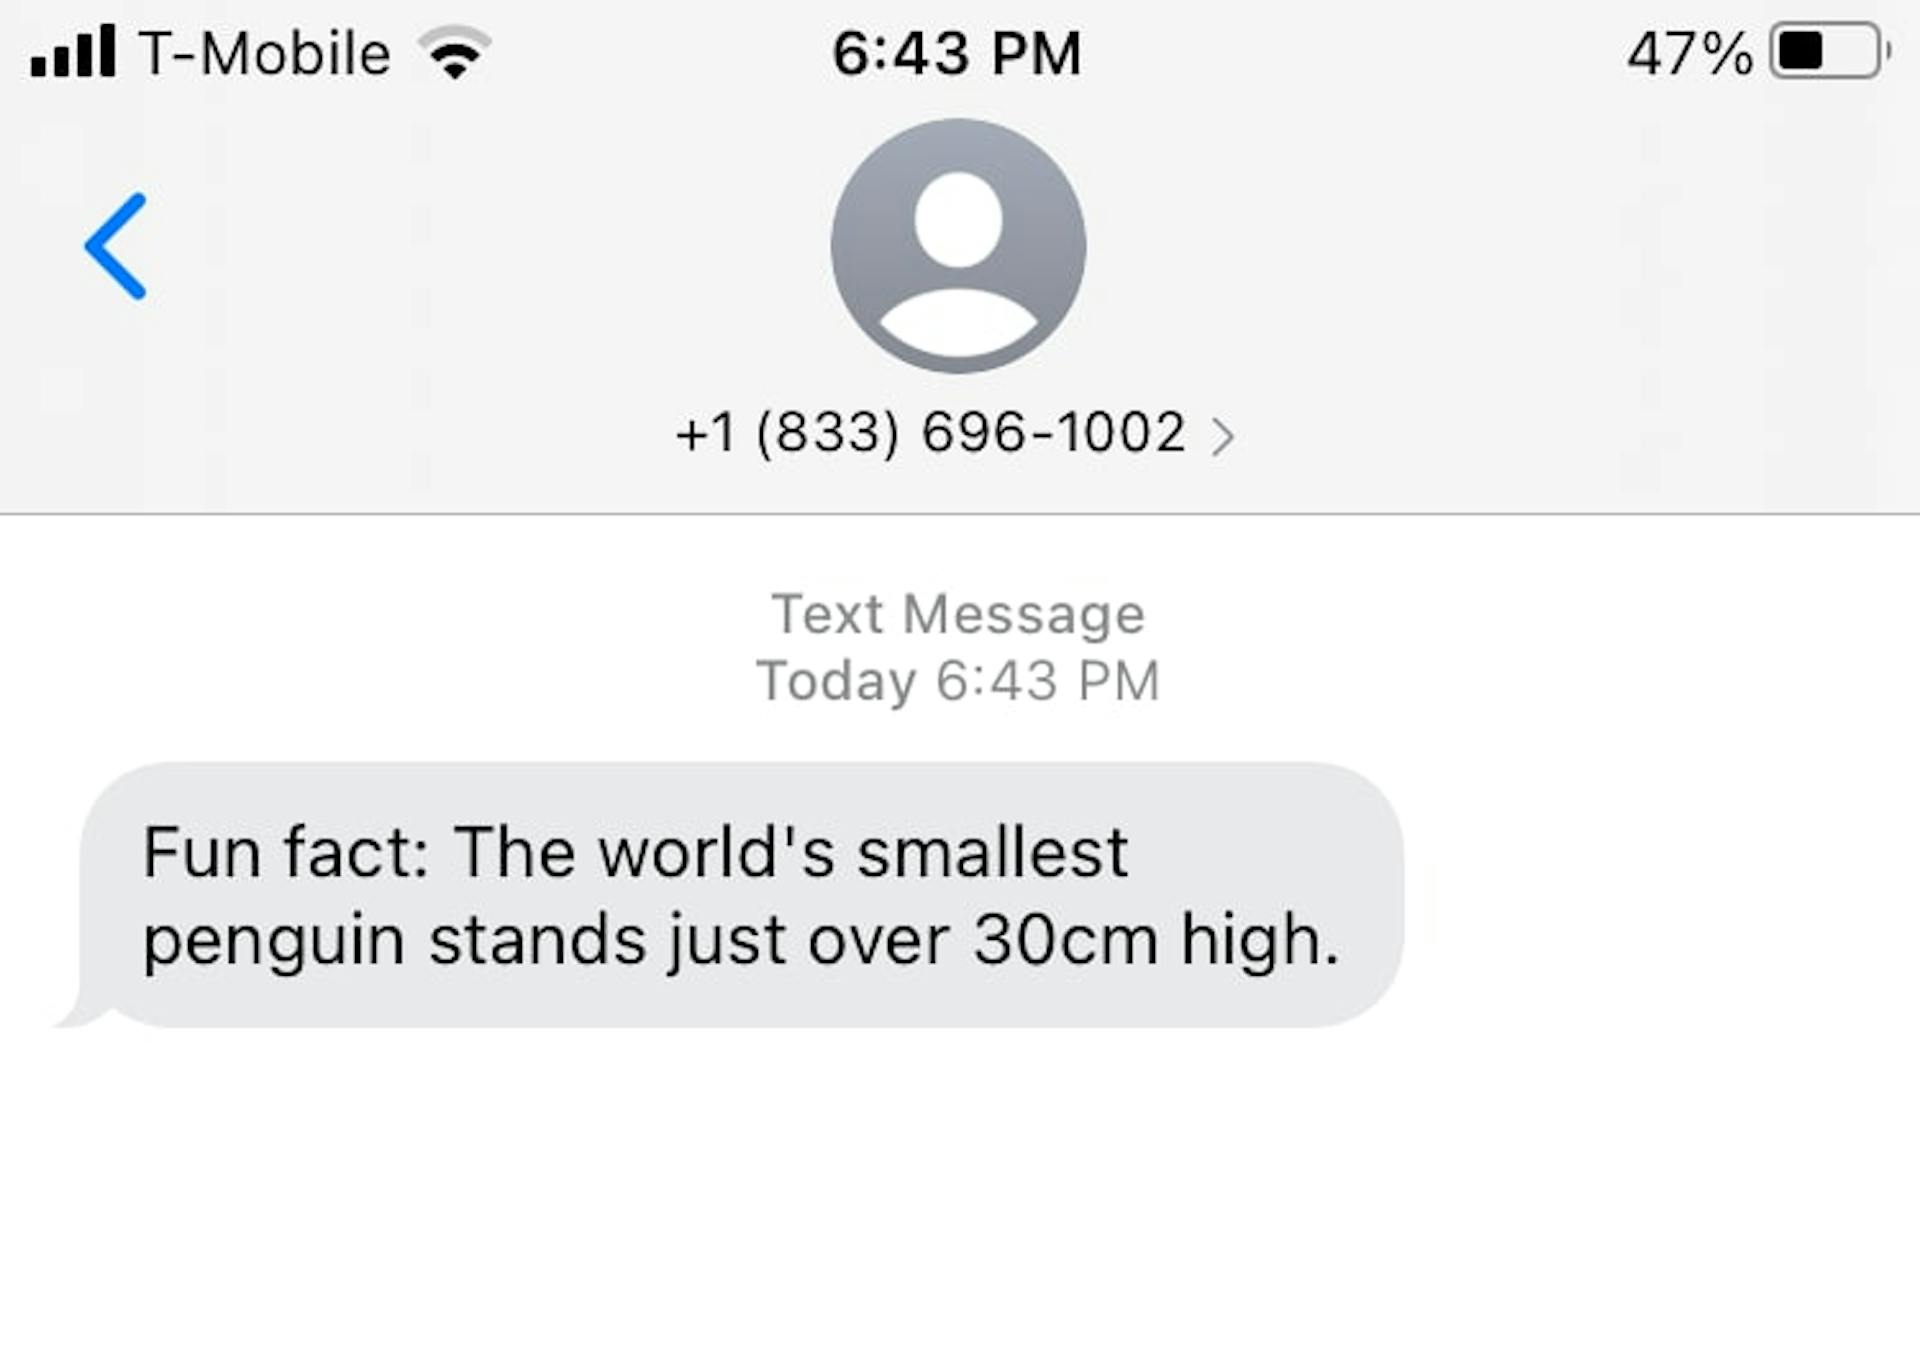 Text message with a fun fact about penguins